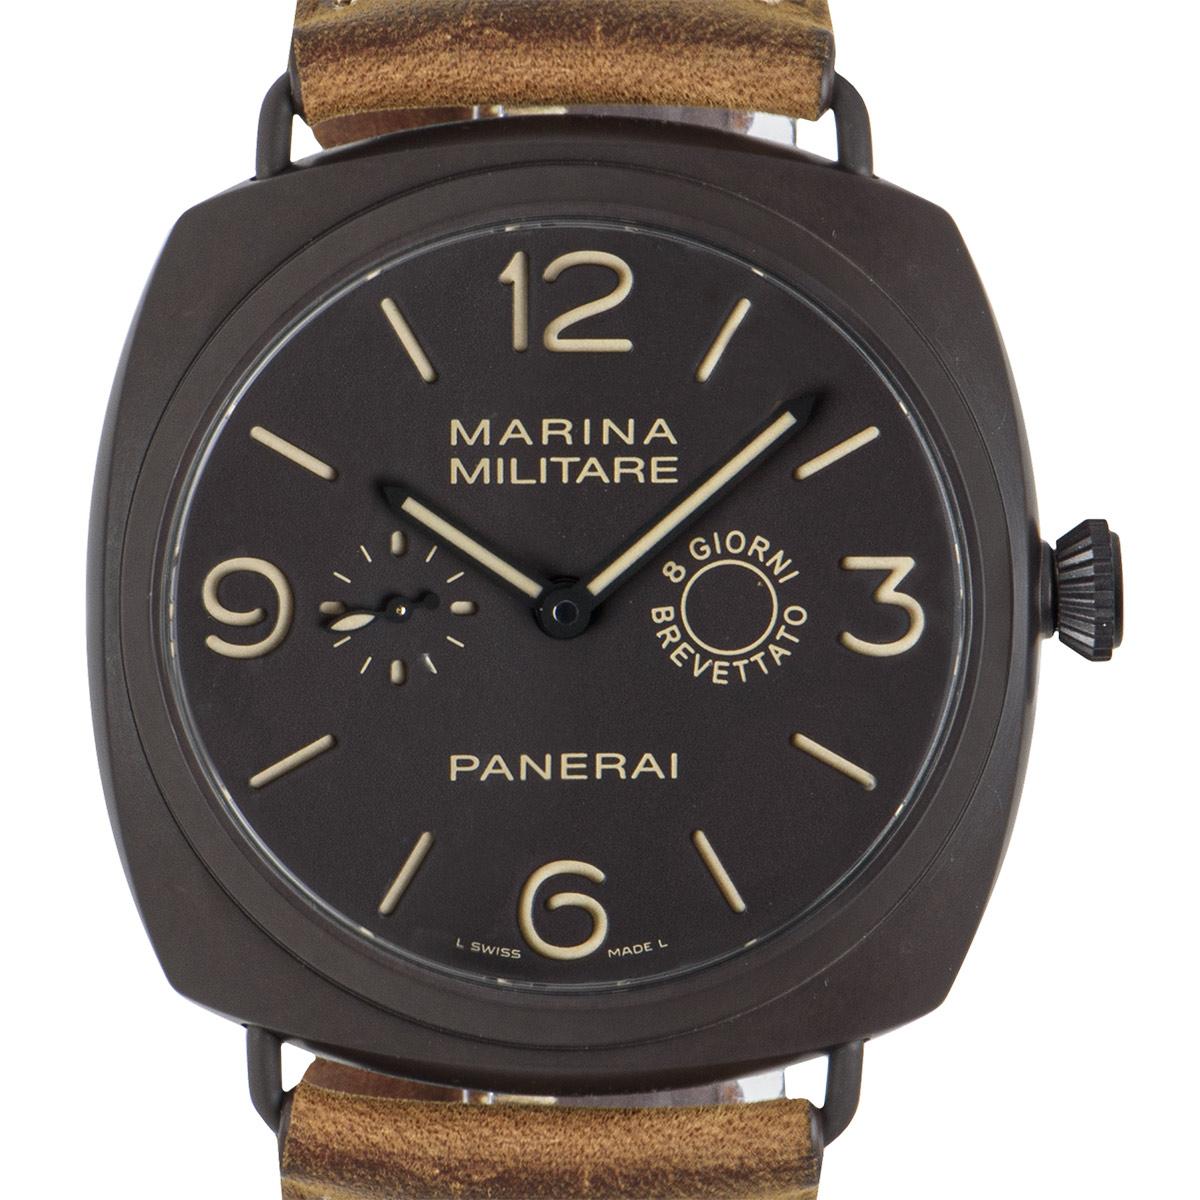 A Composite Radiomir Marina Militare 8 Giorni Gents Wristwatch PAM00339, brown dial with arabic numbers and index batons, small seconds at 9 0'clock, brown leather strap with a composite pin buckle, sapphire glass, manual wind movement, 8 days power